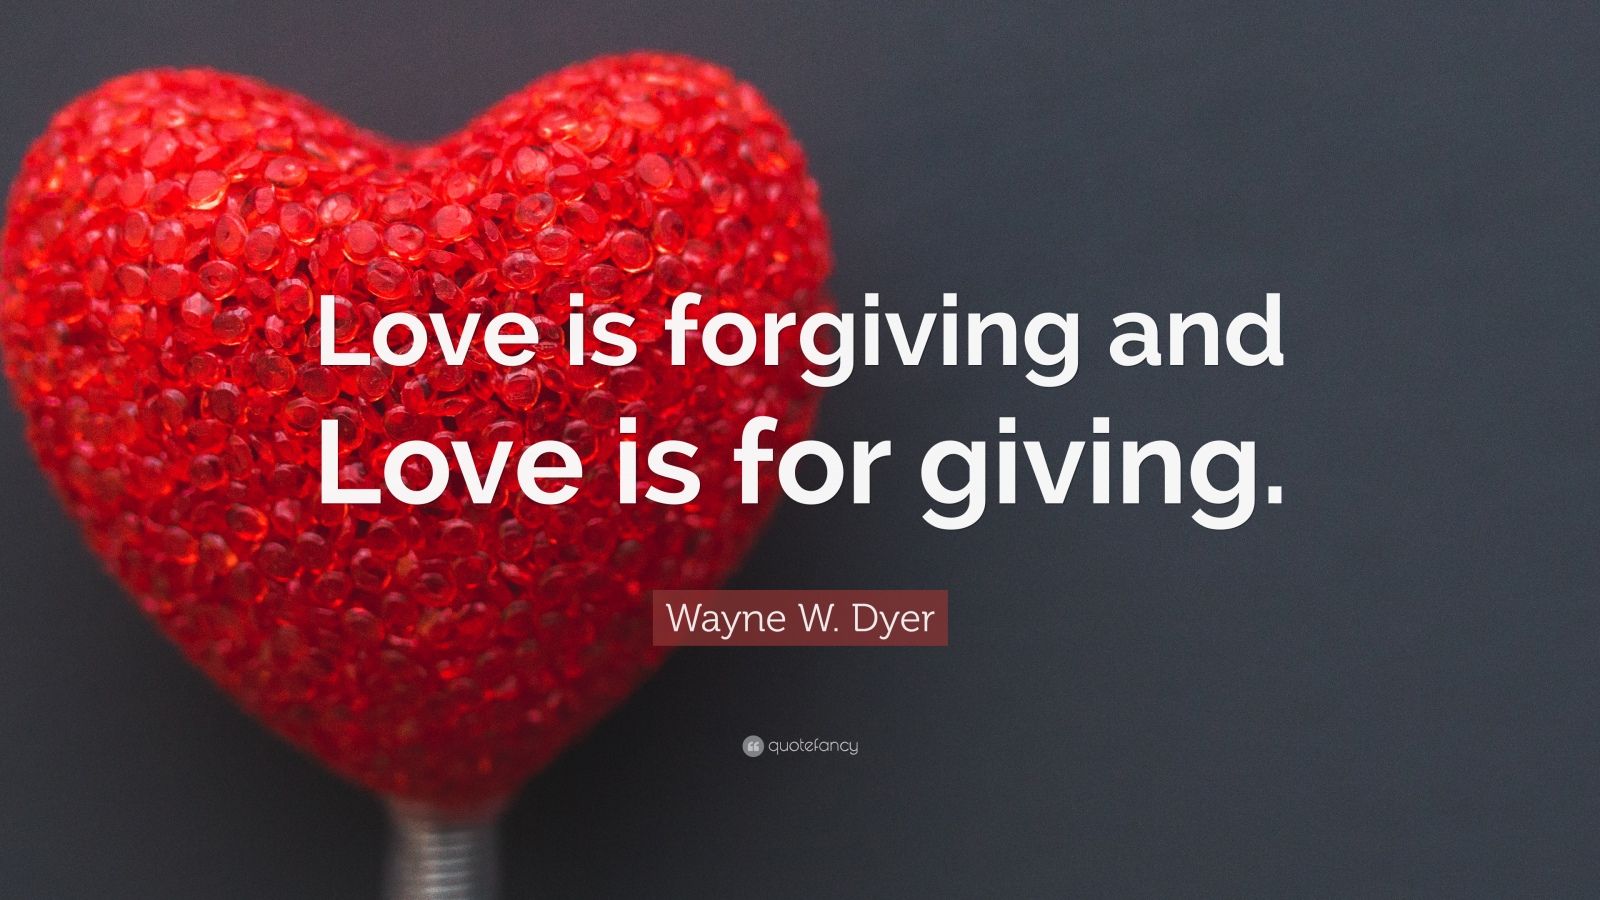 an essay on love is giving and forgiving